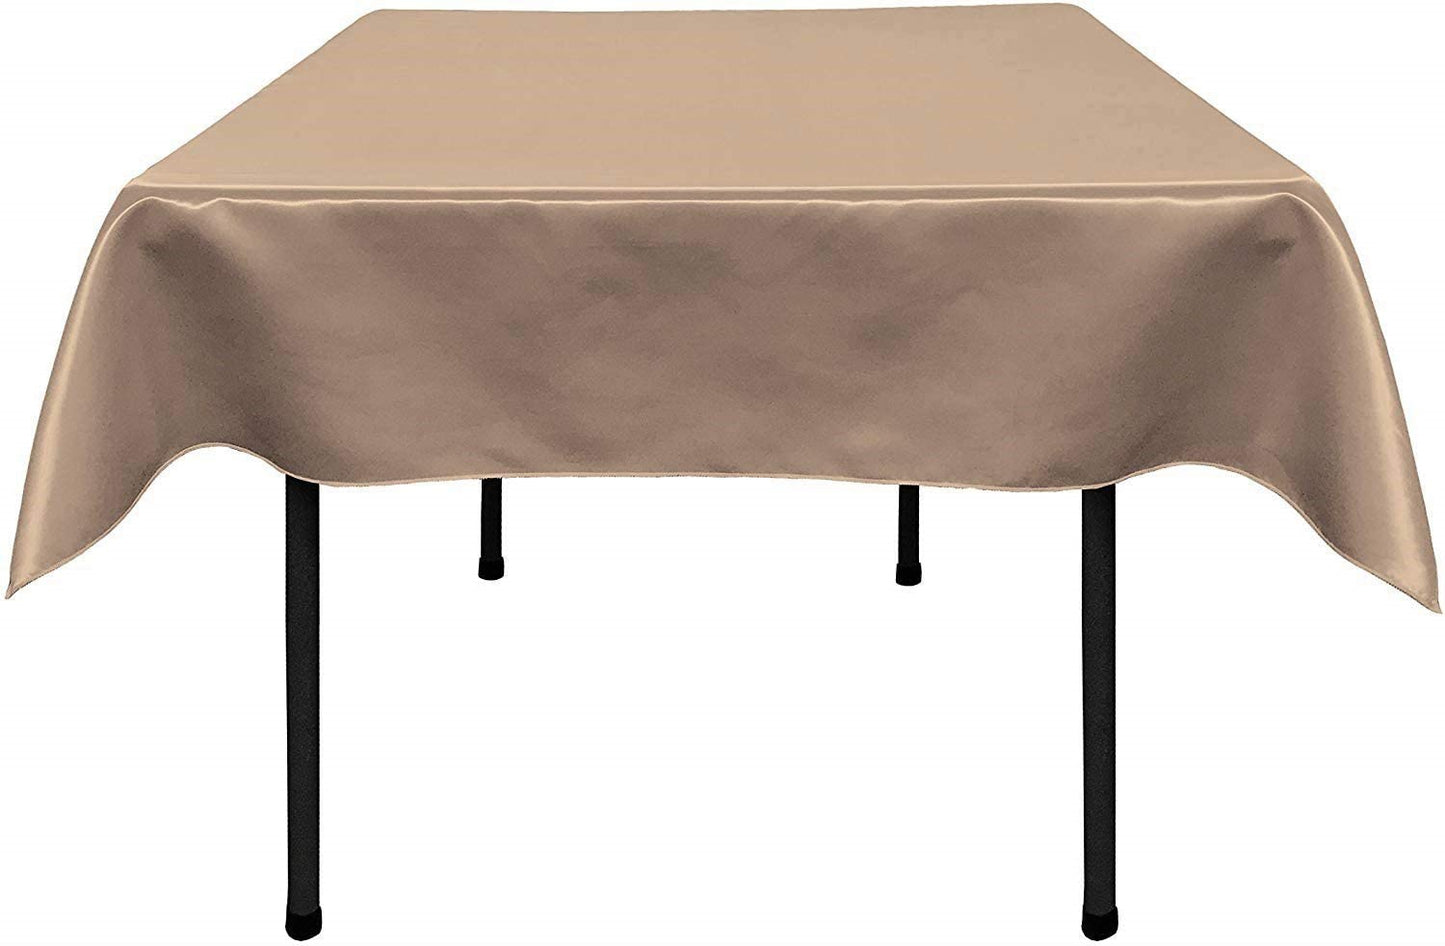 Polyester Bridal Satin Table Tablecloth (Taupe,